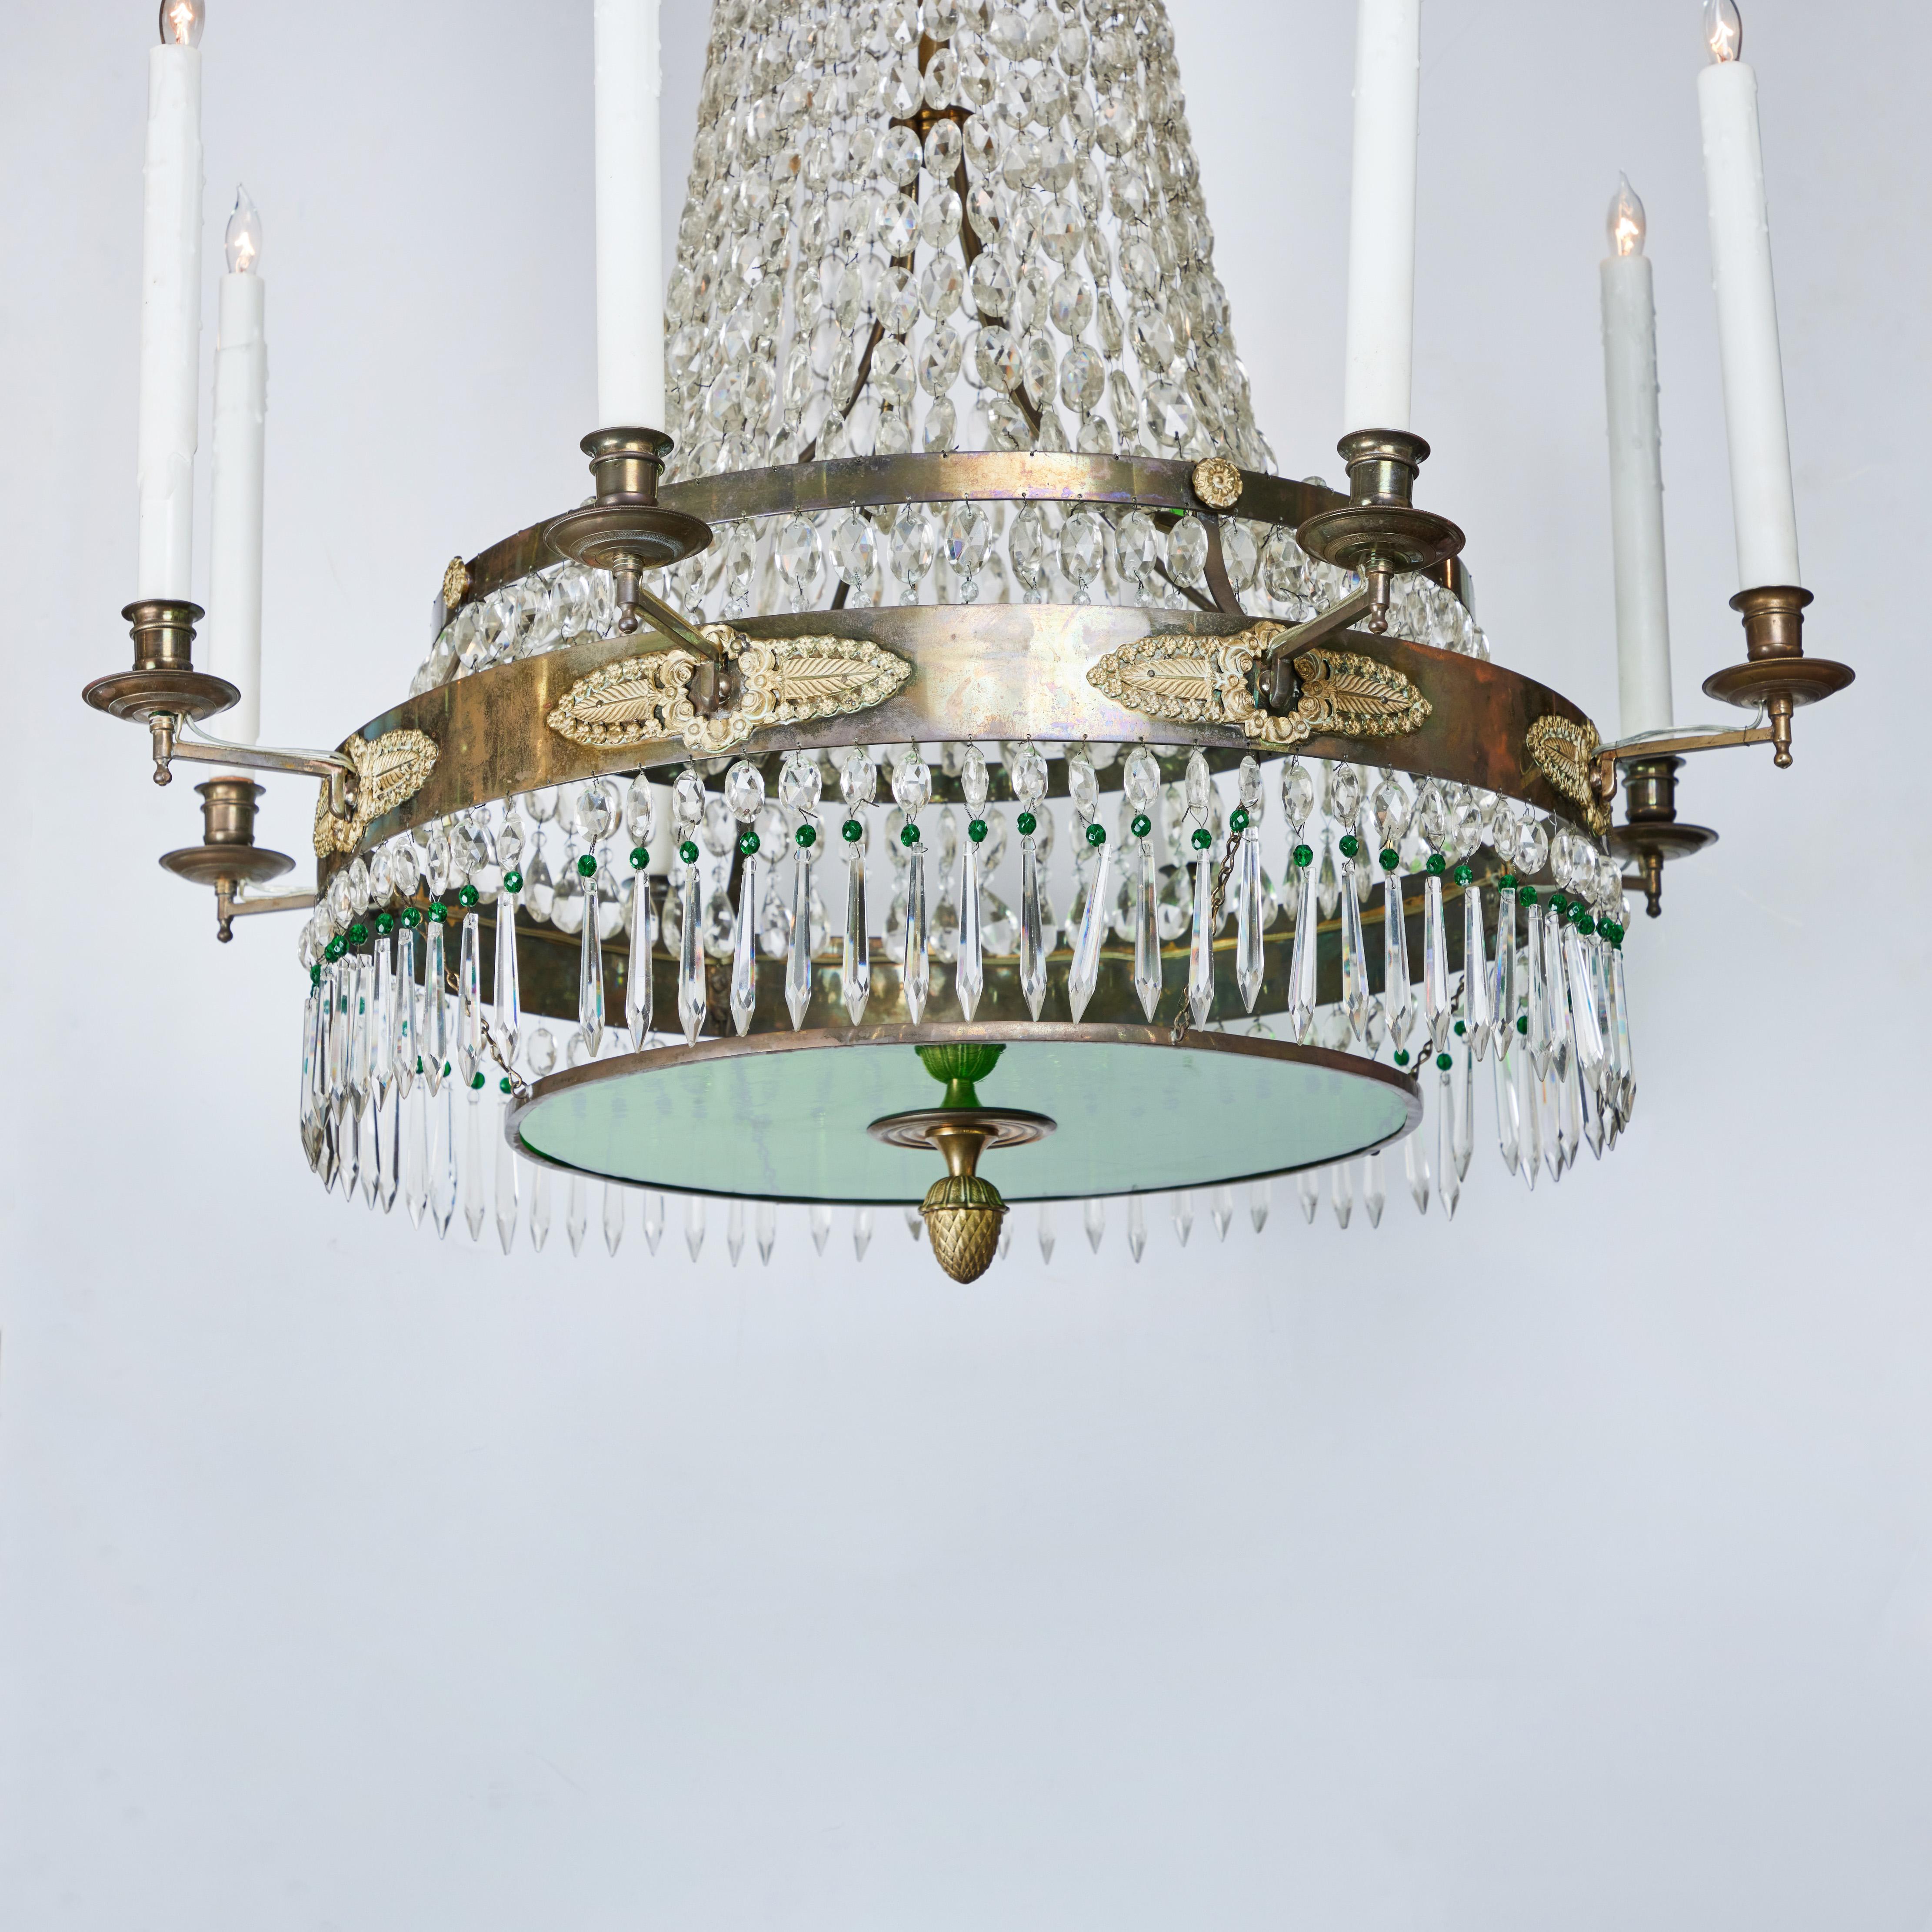 An elegant, bronze and crystal, eight-arm chandelier with 2 emerald green glass plates and green accent crystals. The top tier features a cascade of crystal hovering above long crystal swags, creating a luxurious, but graceful body that terminates